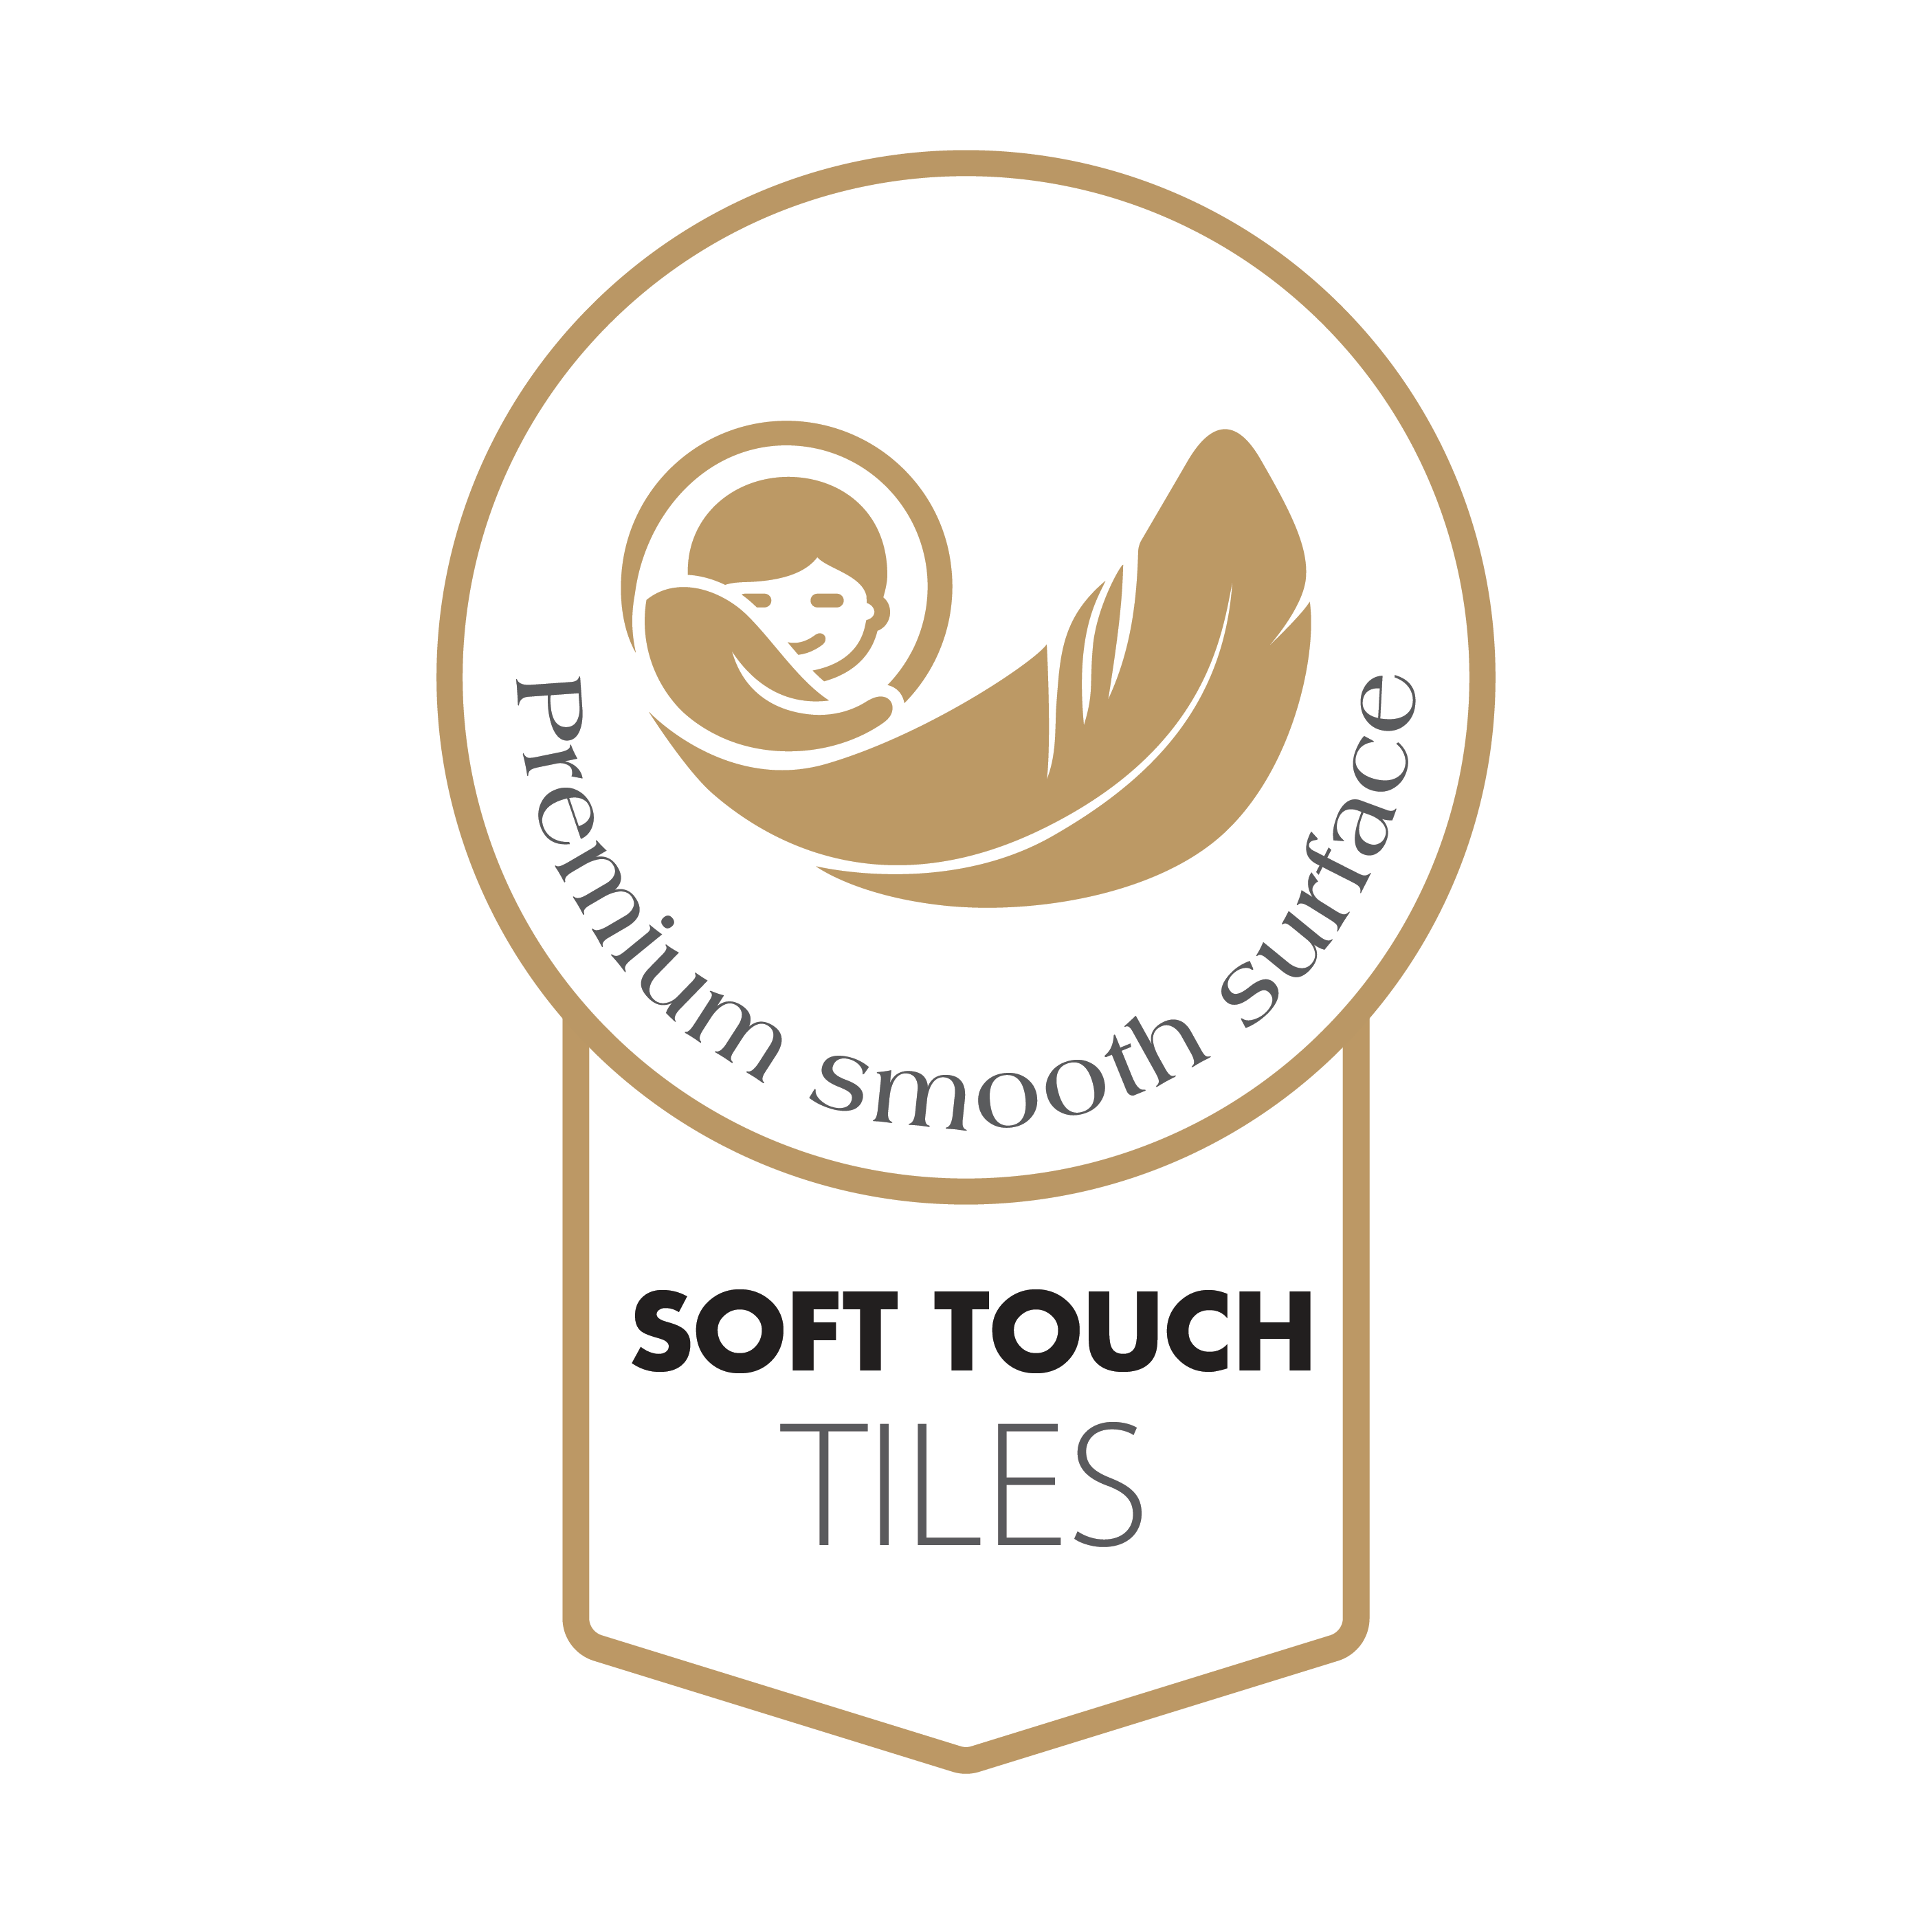 Soft Touch Tiles 2020